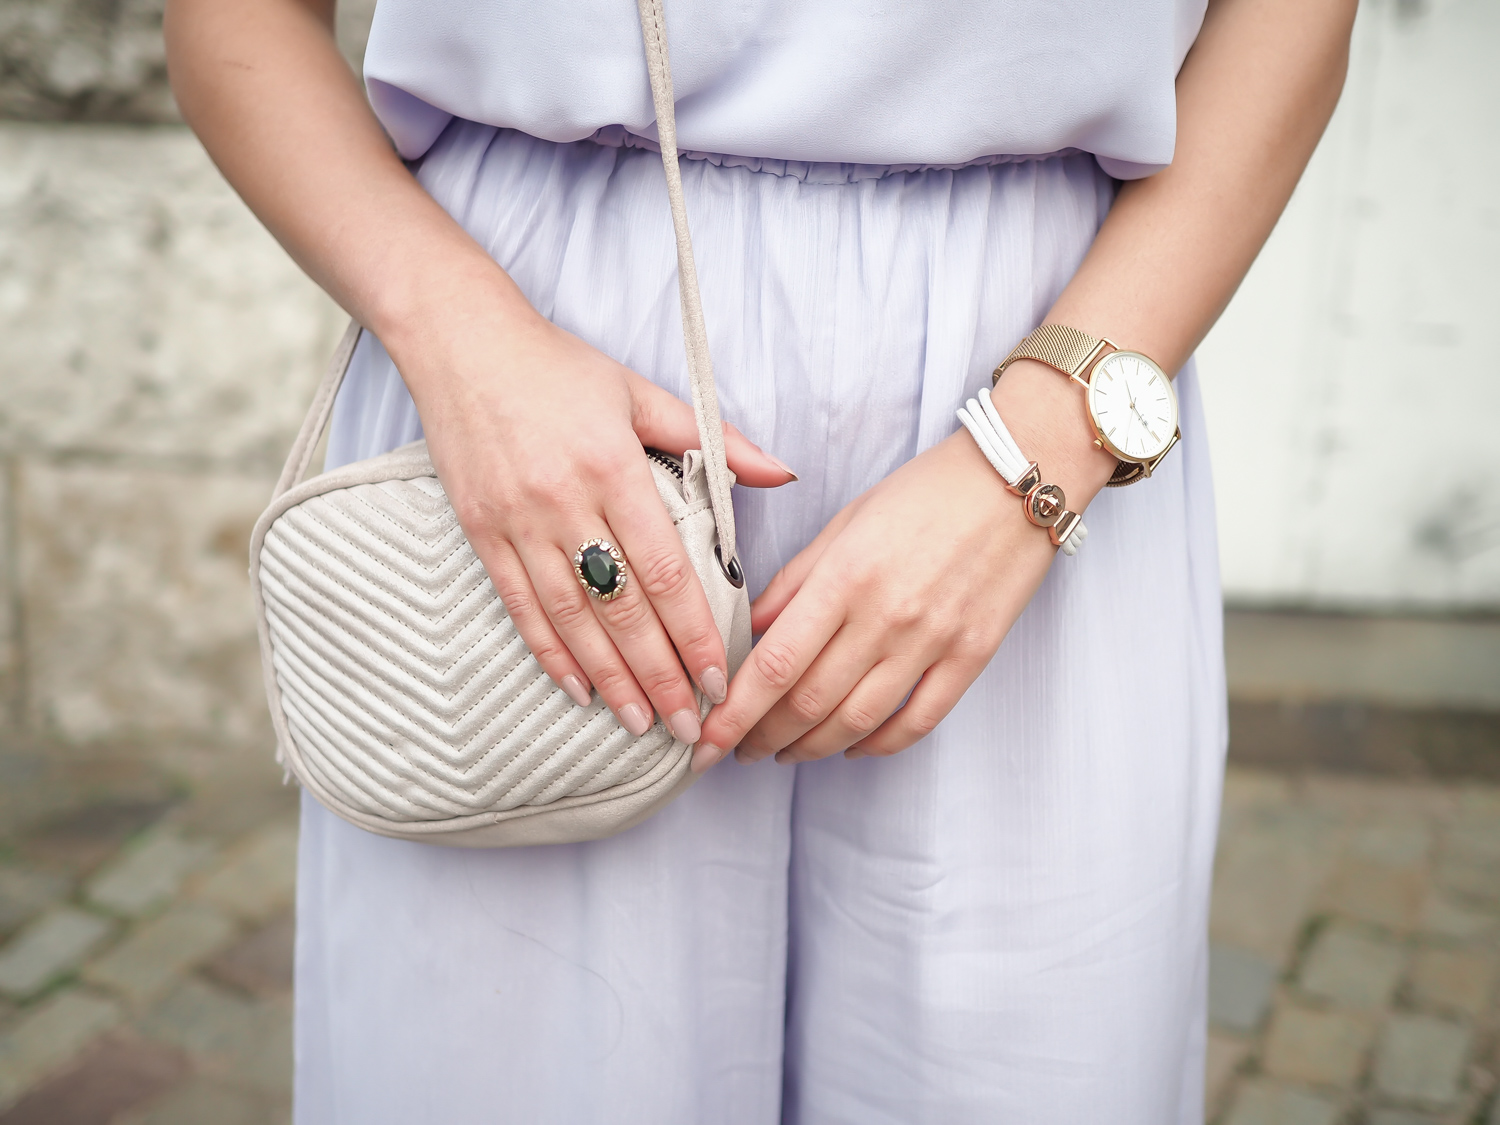 wpid-lilac-palazzo-pants-mango-strappy-top-hm-overall-wide-legs-trenchcoat-eleganz-night-out-big-earring-samieze-berlin-fashionblog-chic-streetstyle-summer-gala-event-8.jpg.jpeg